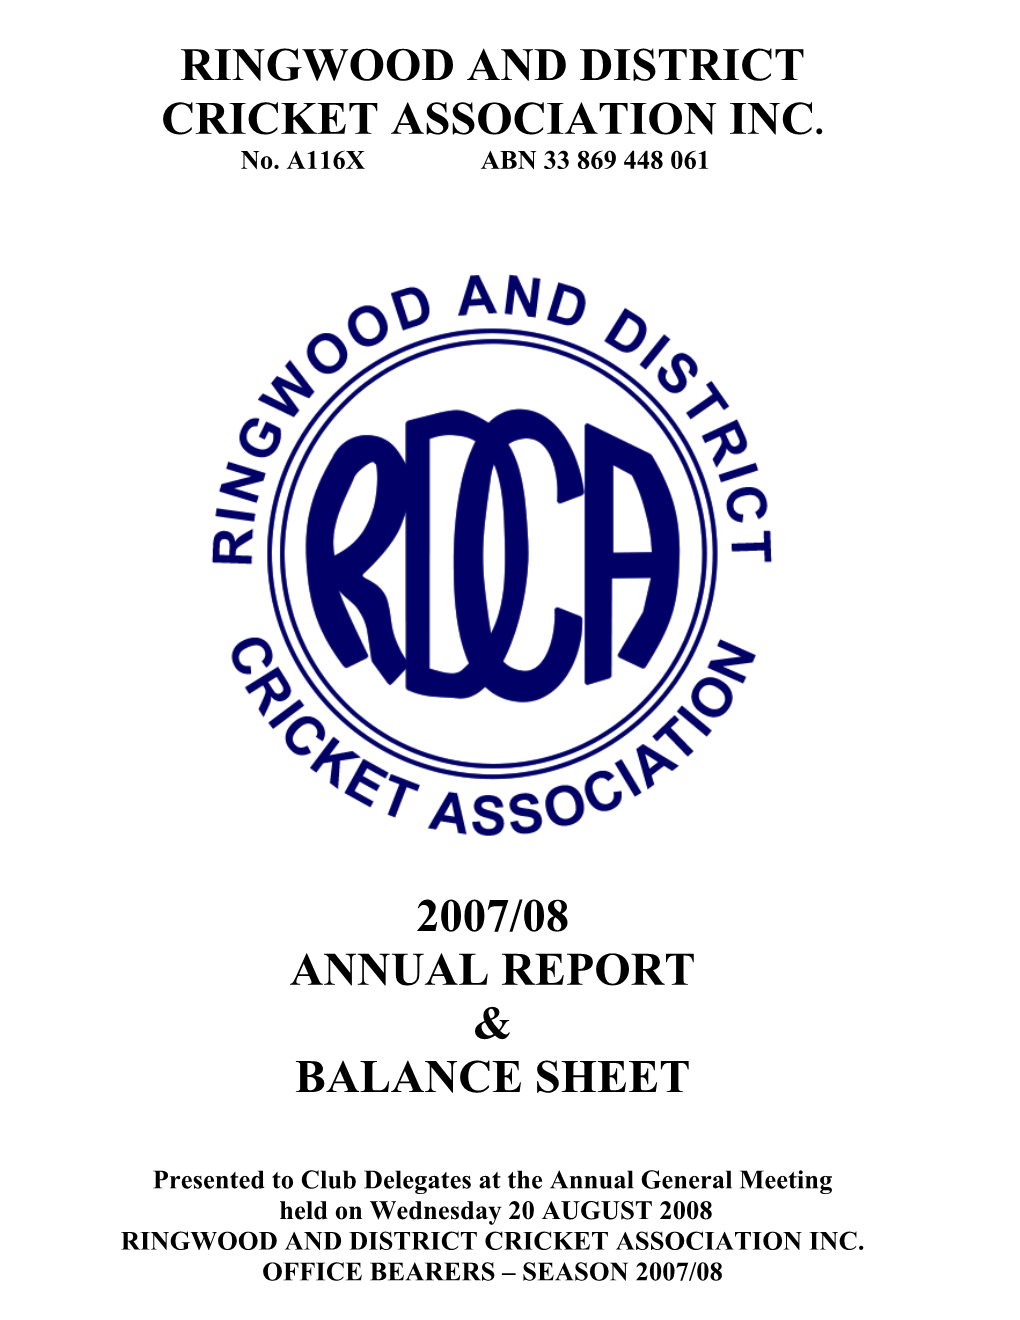 Ringwood and District Cricket Association Inc. 2007